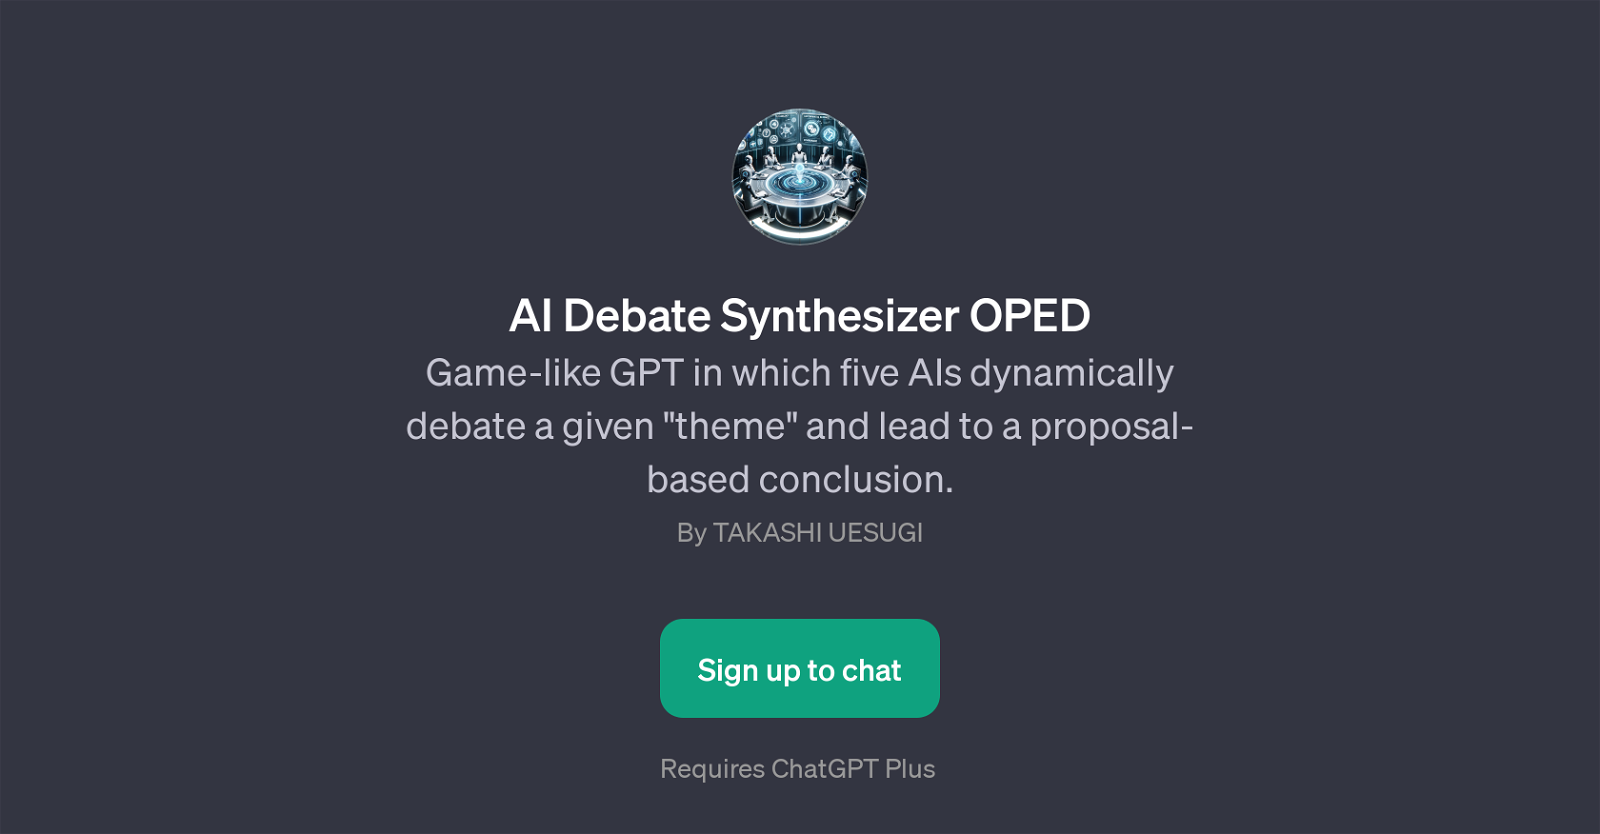 AI Debate Synthesizer OPED website